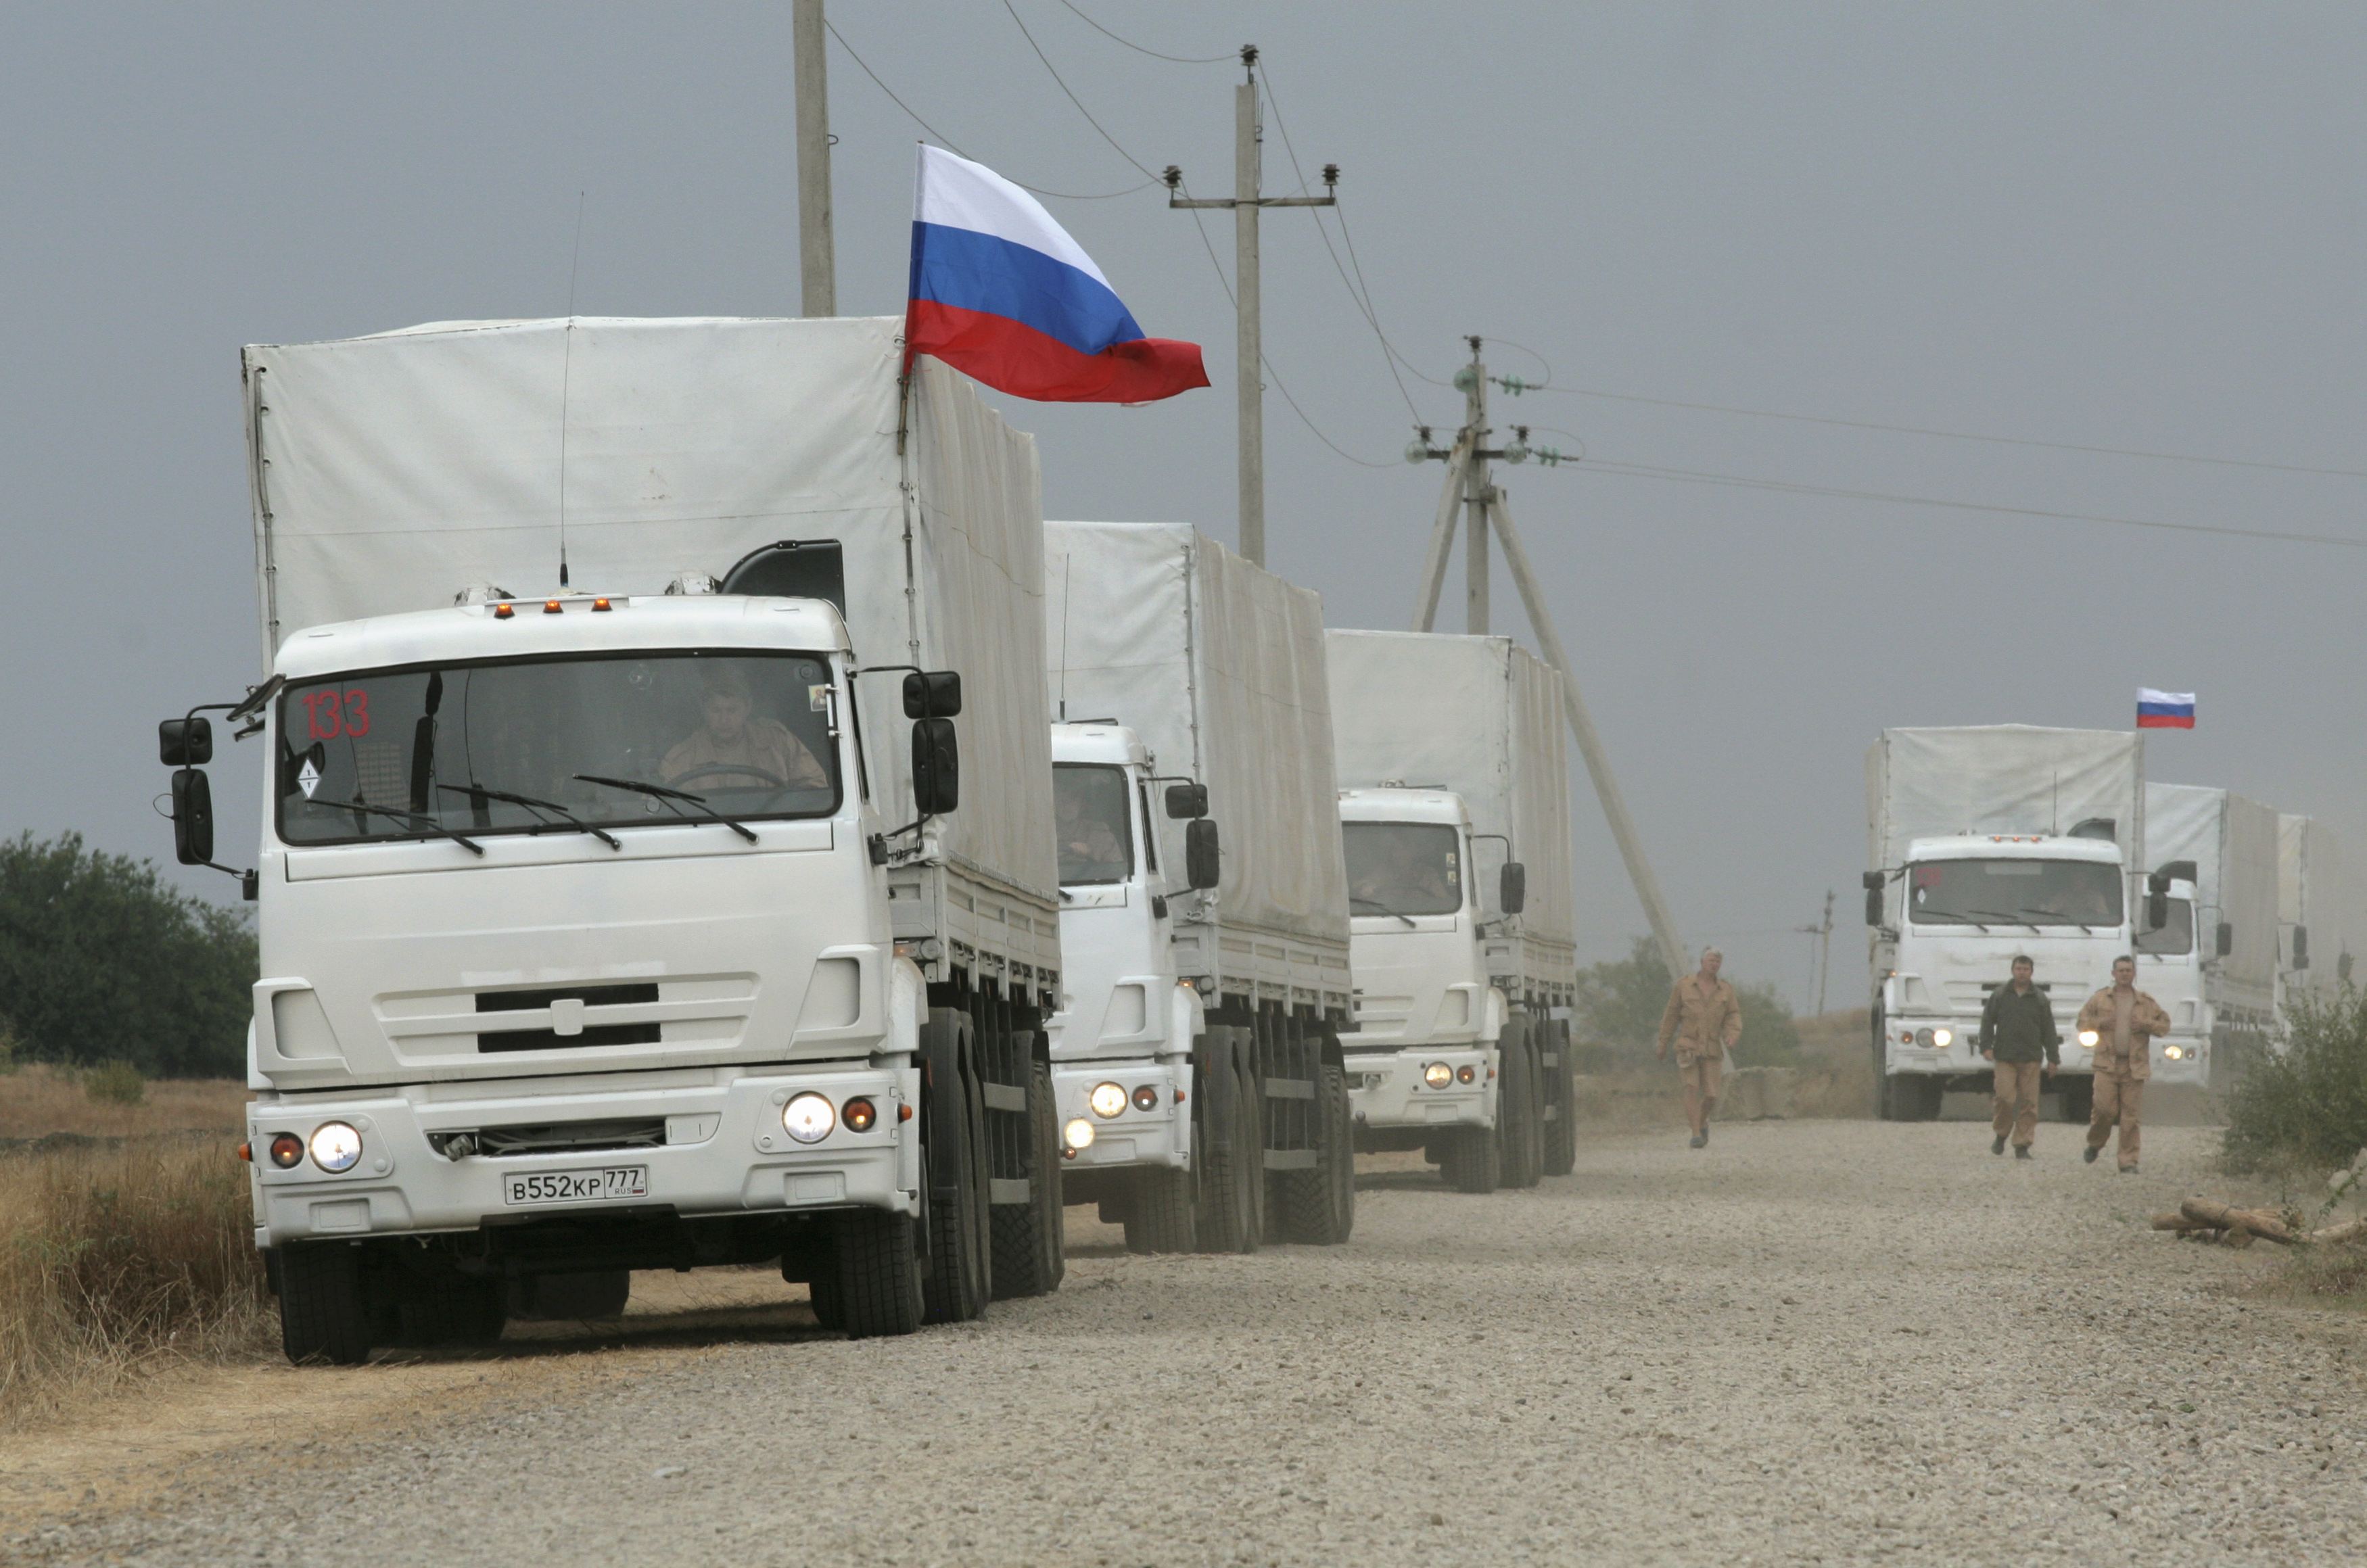 A Russian convoy of trucks carrying humanitarian aid for Ukraine are parked by the side of a road near Kamensk-Shakhtinsky